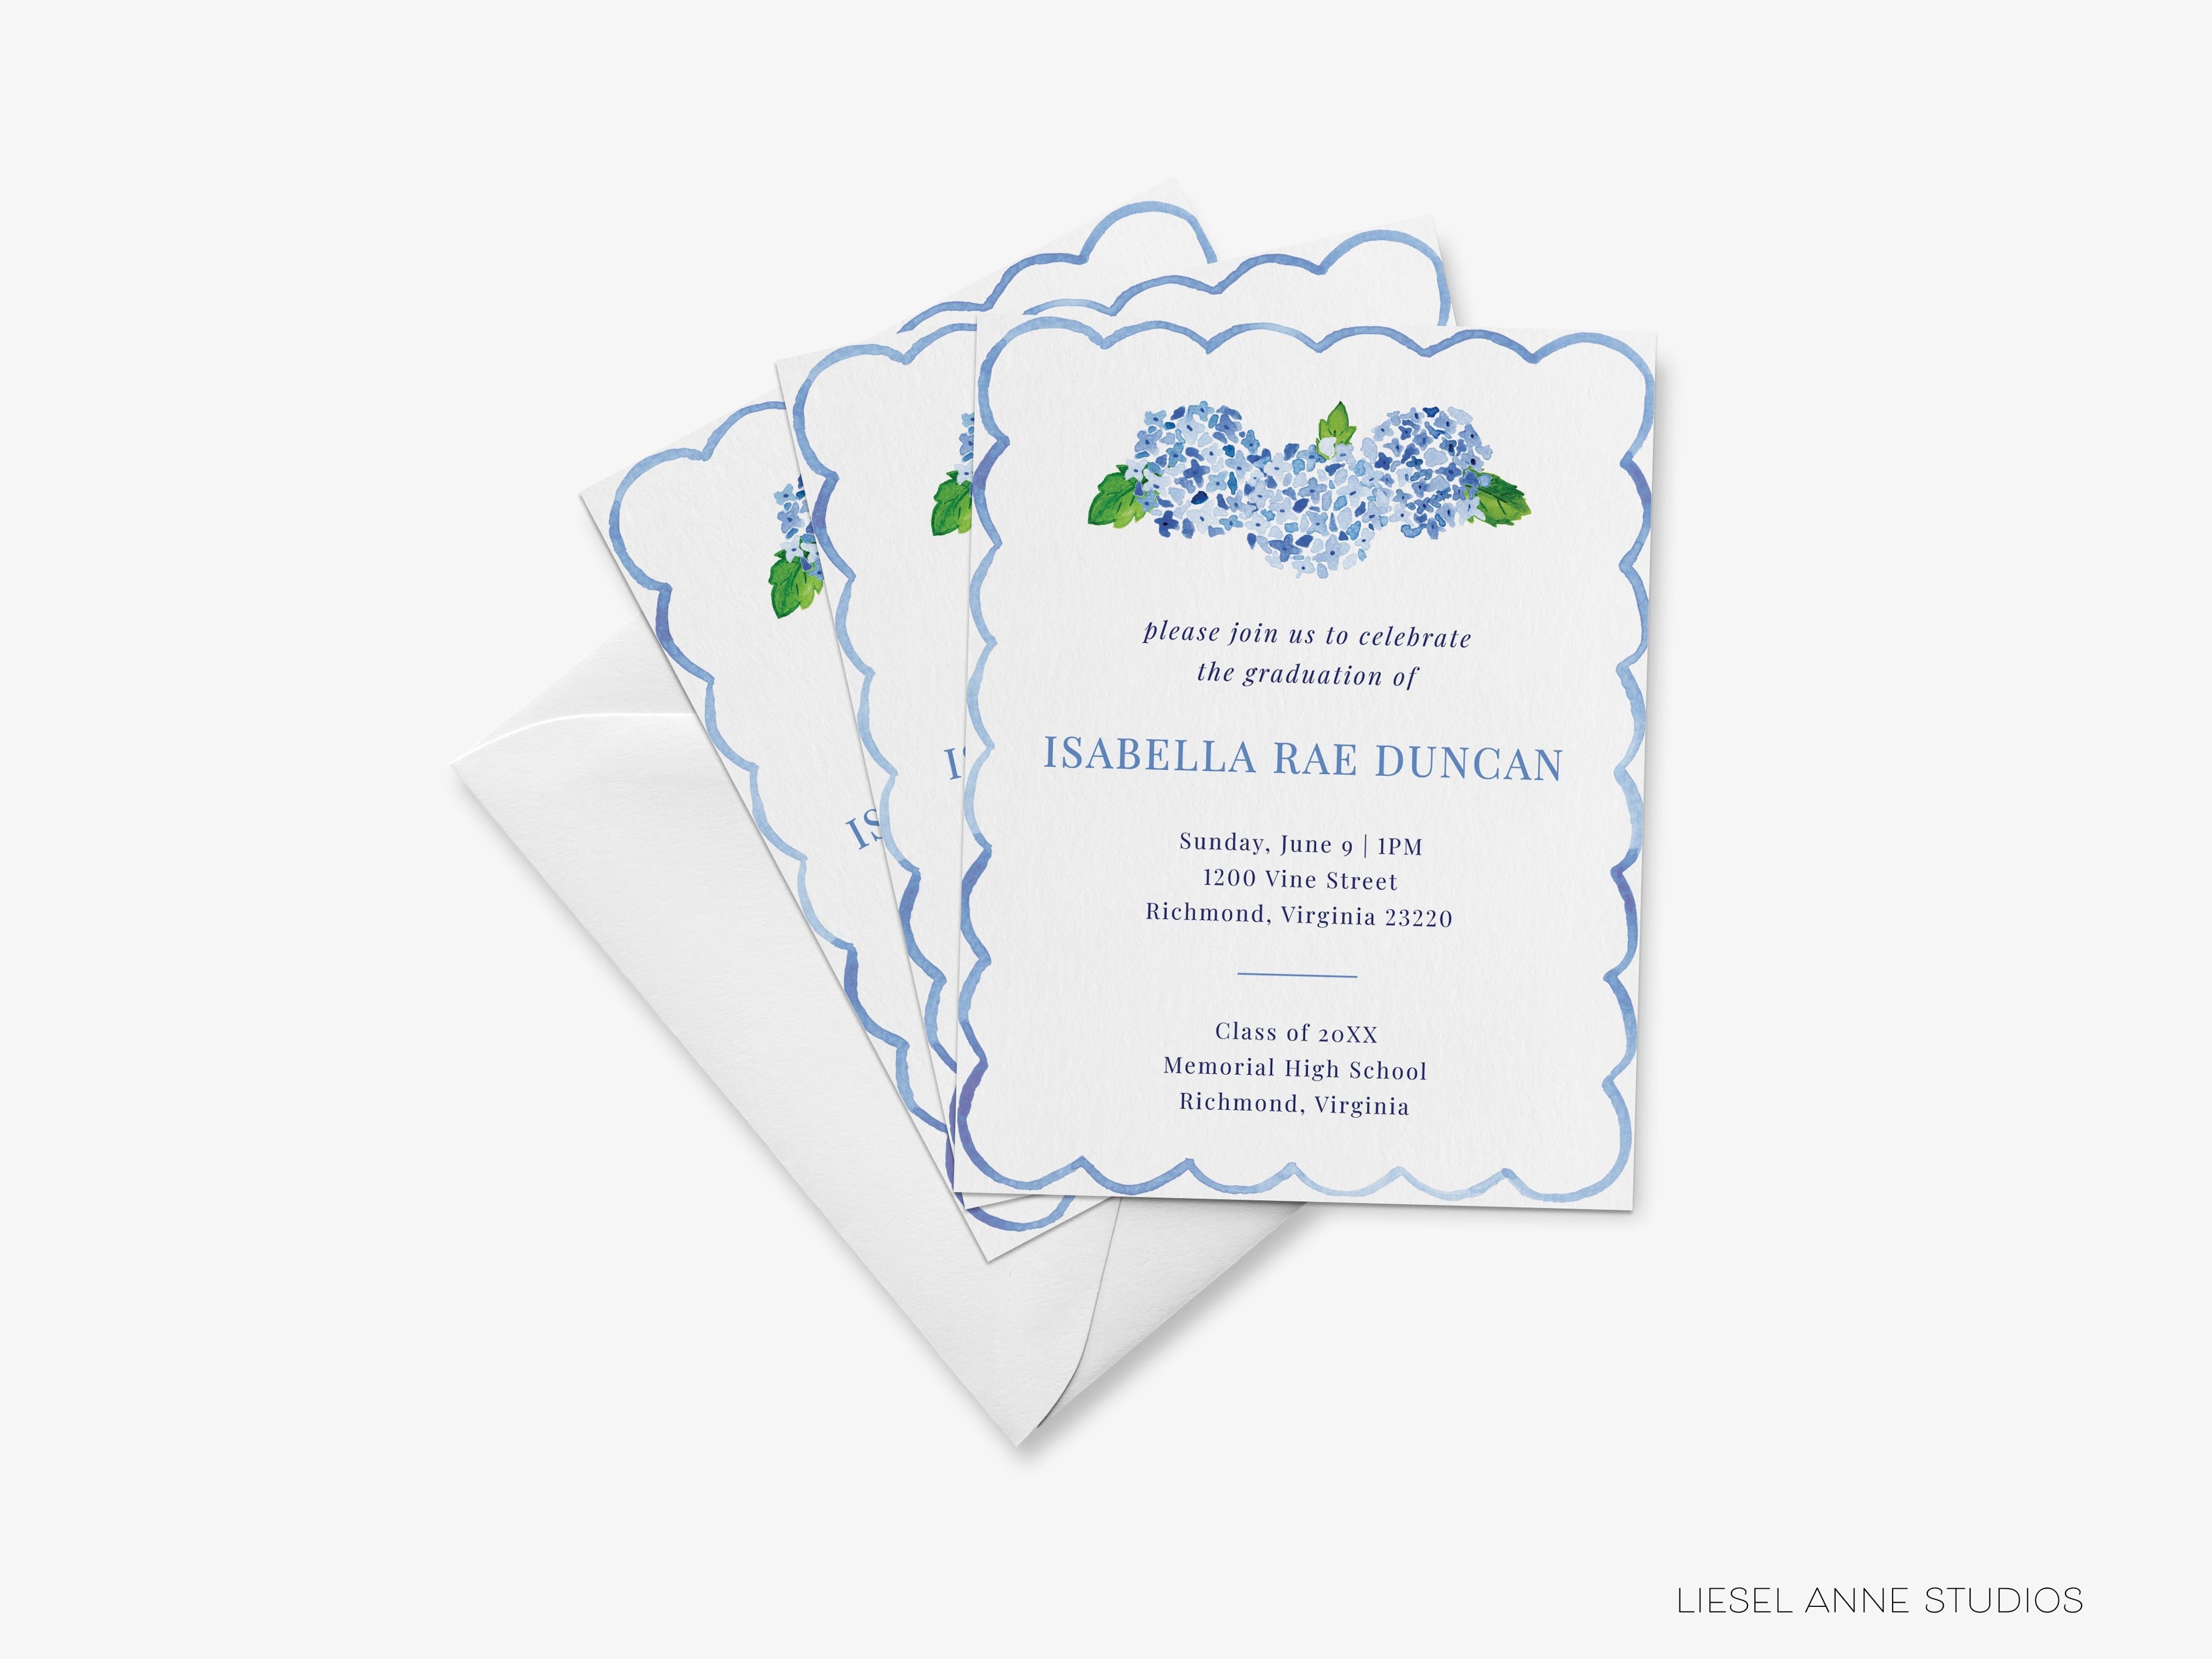 Hydrangea Graduation Invitations-These personalized flat graduation announcements are 4.25x5.5 and feature our hand-painted watercolor hydrangeas, printed in the USA on 120lb textured stock. They come with your choice of envelopes and make great grad invitations for friends and family.-The Singing Little Bird